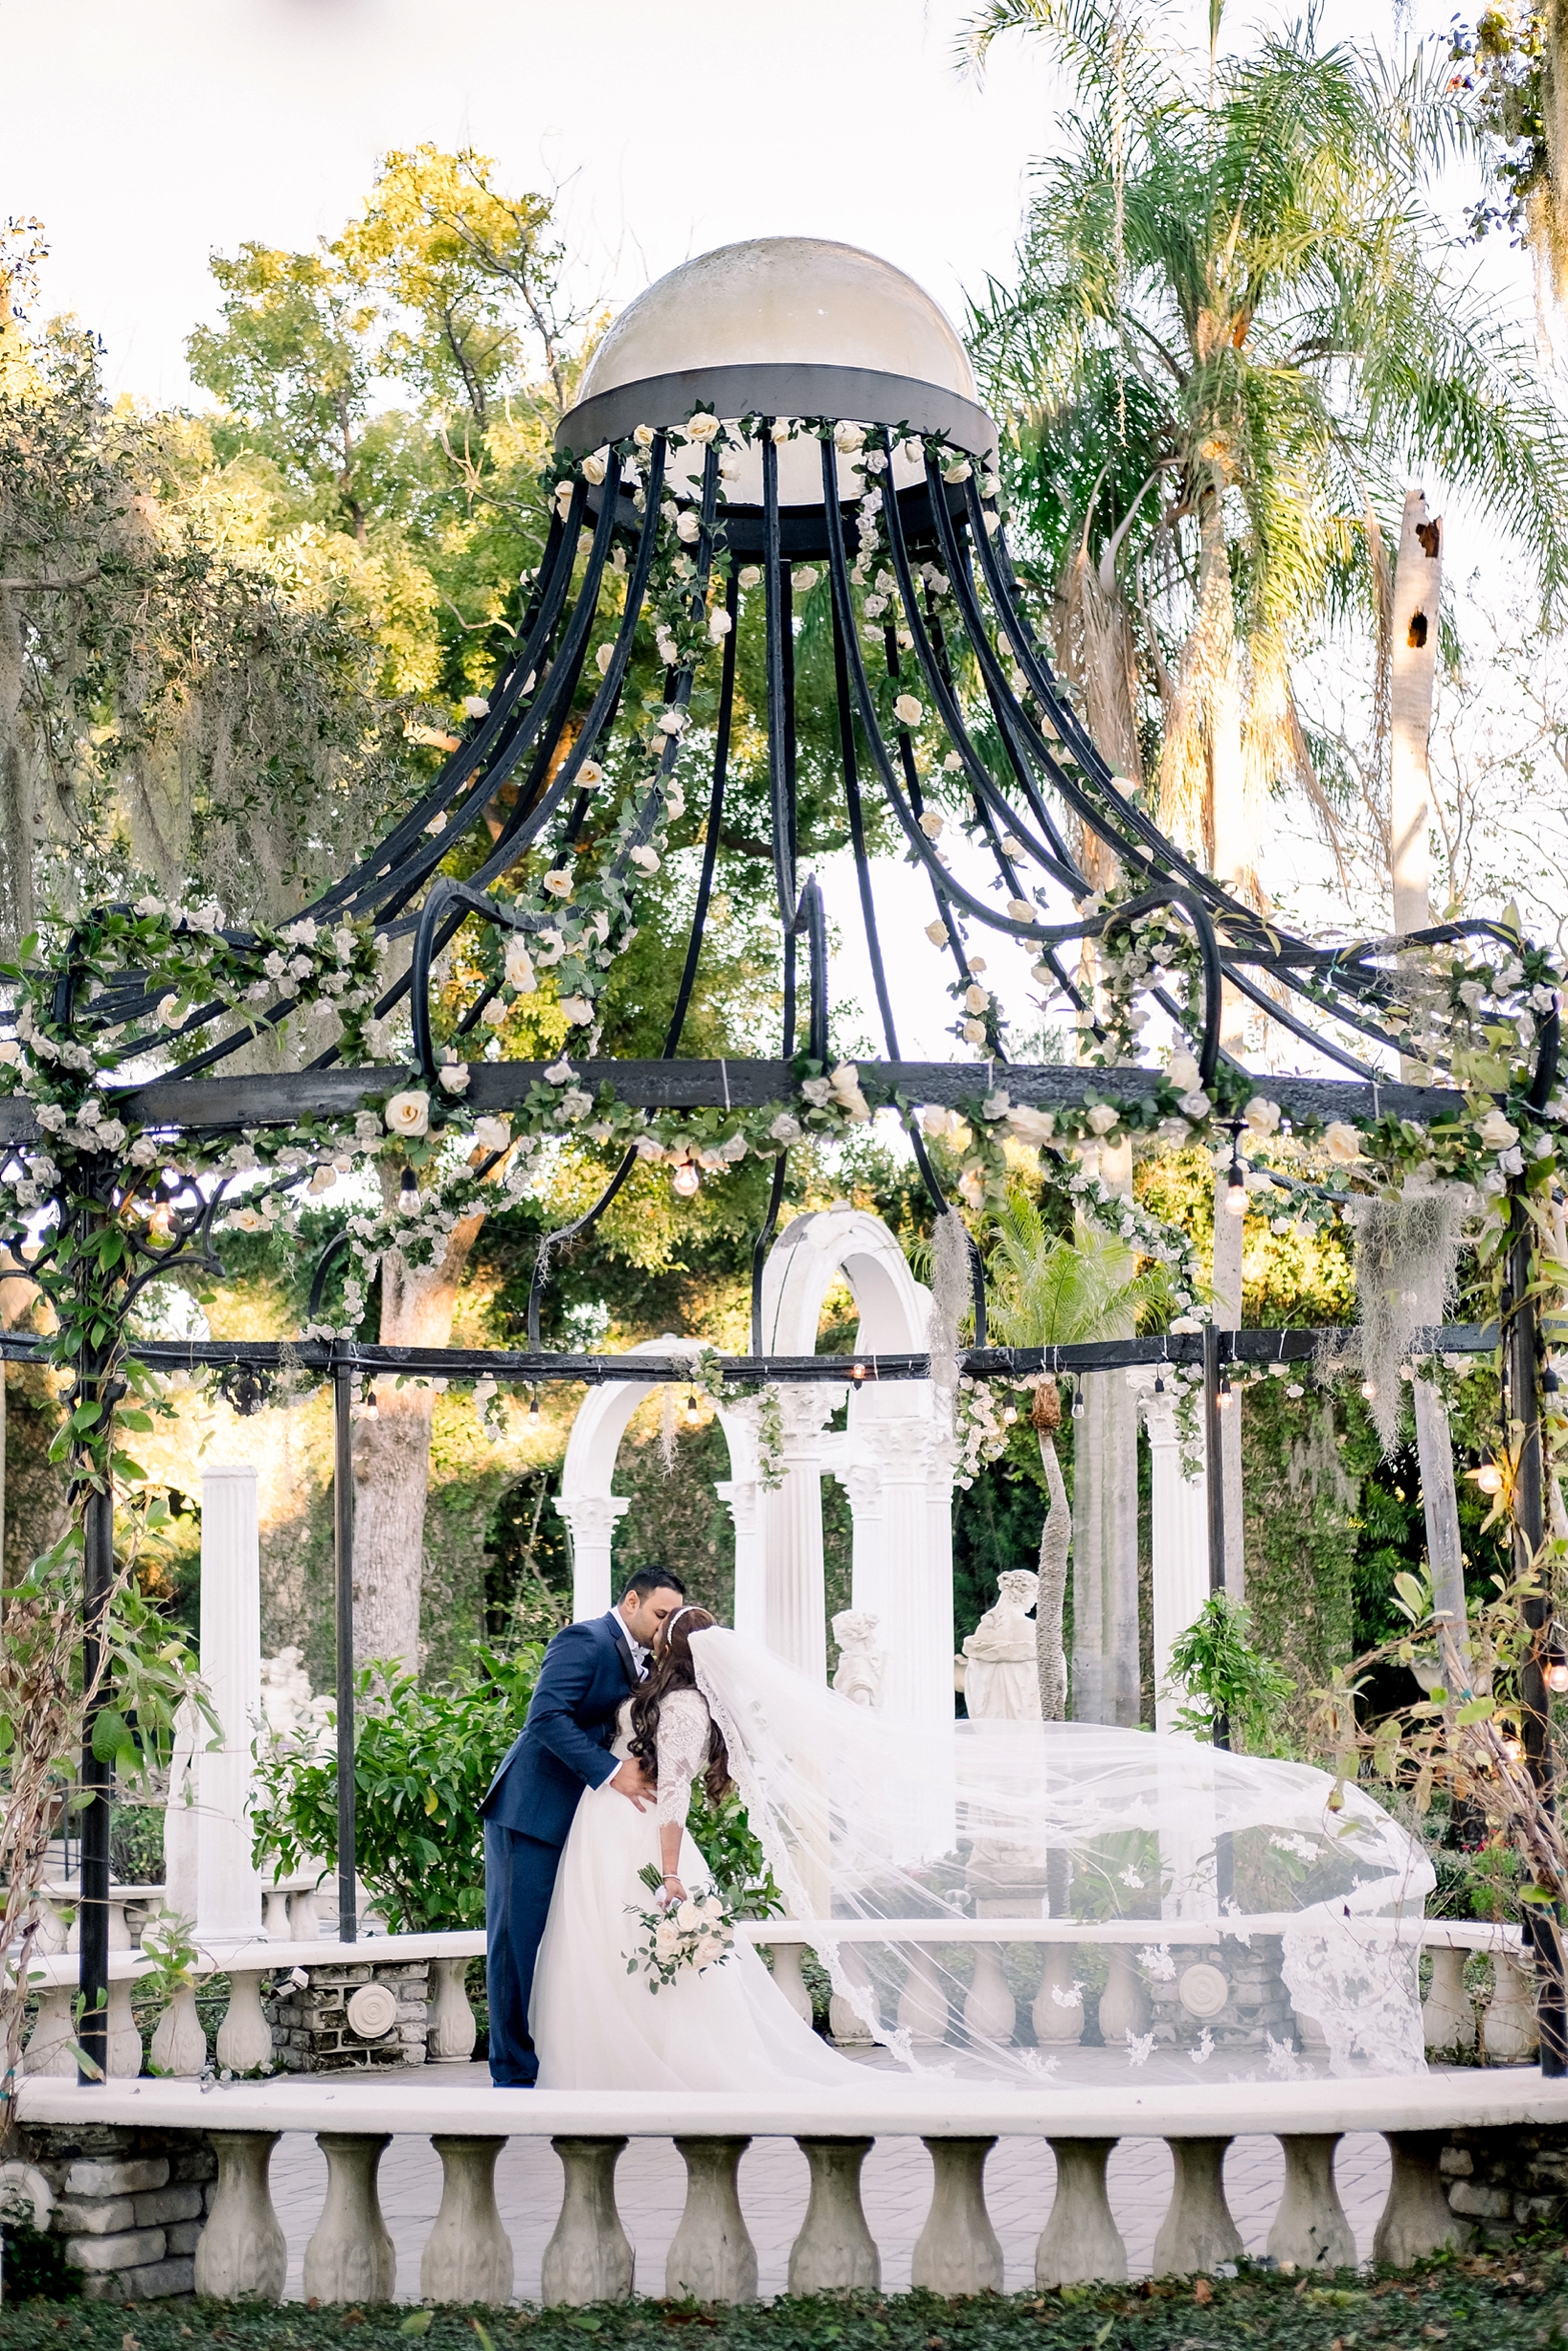 The Bride and Groom kissing under the iron gazebo at the Kapok Tree by sarahben.com